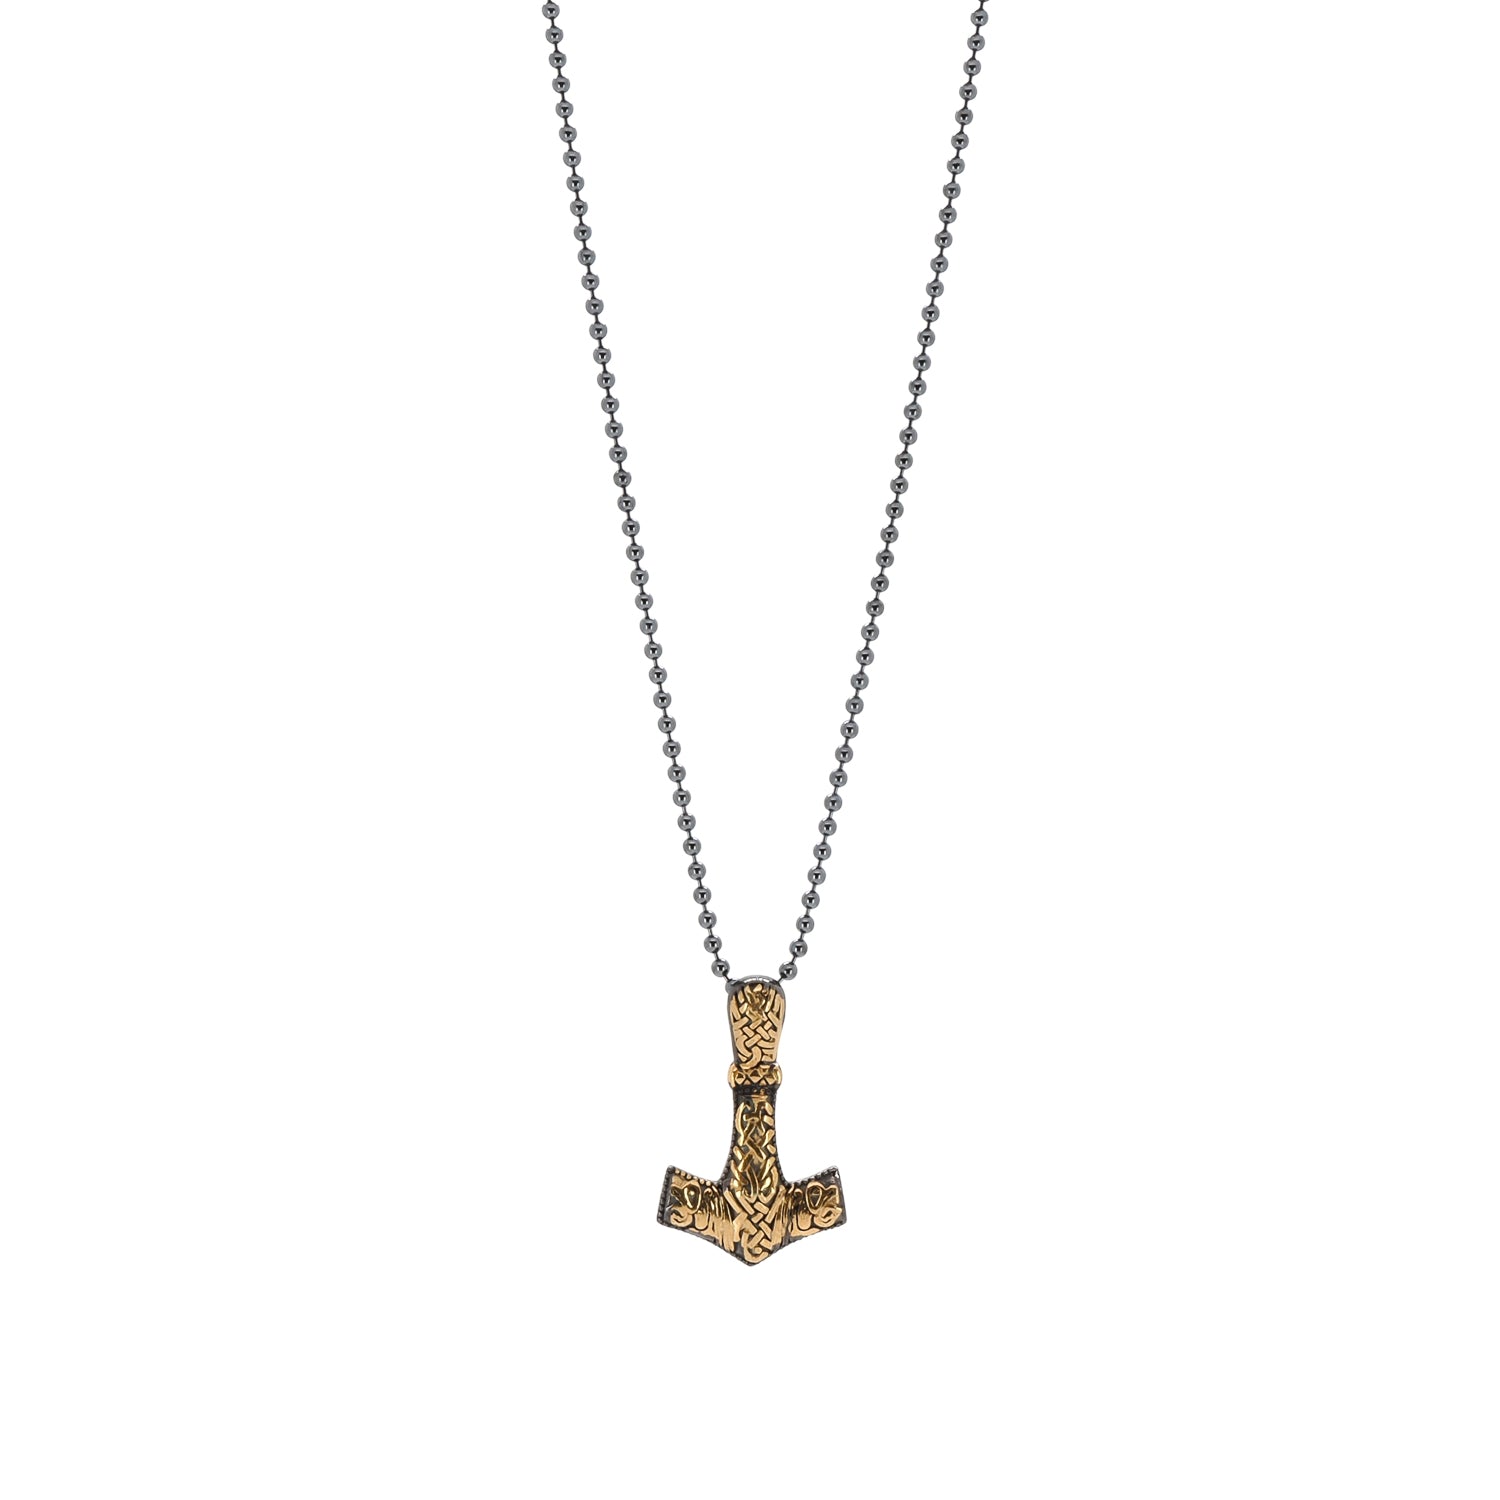 Norse mythology-inspired: Thor Hammer Sterling Silver & Gold Necklace